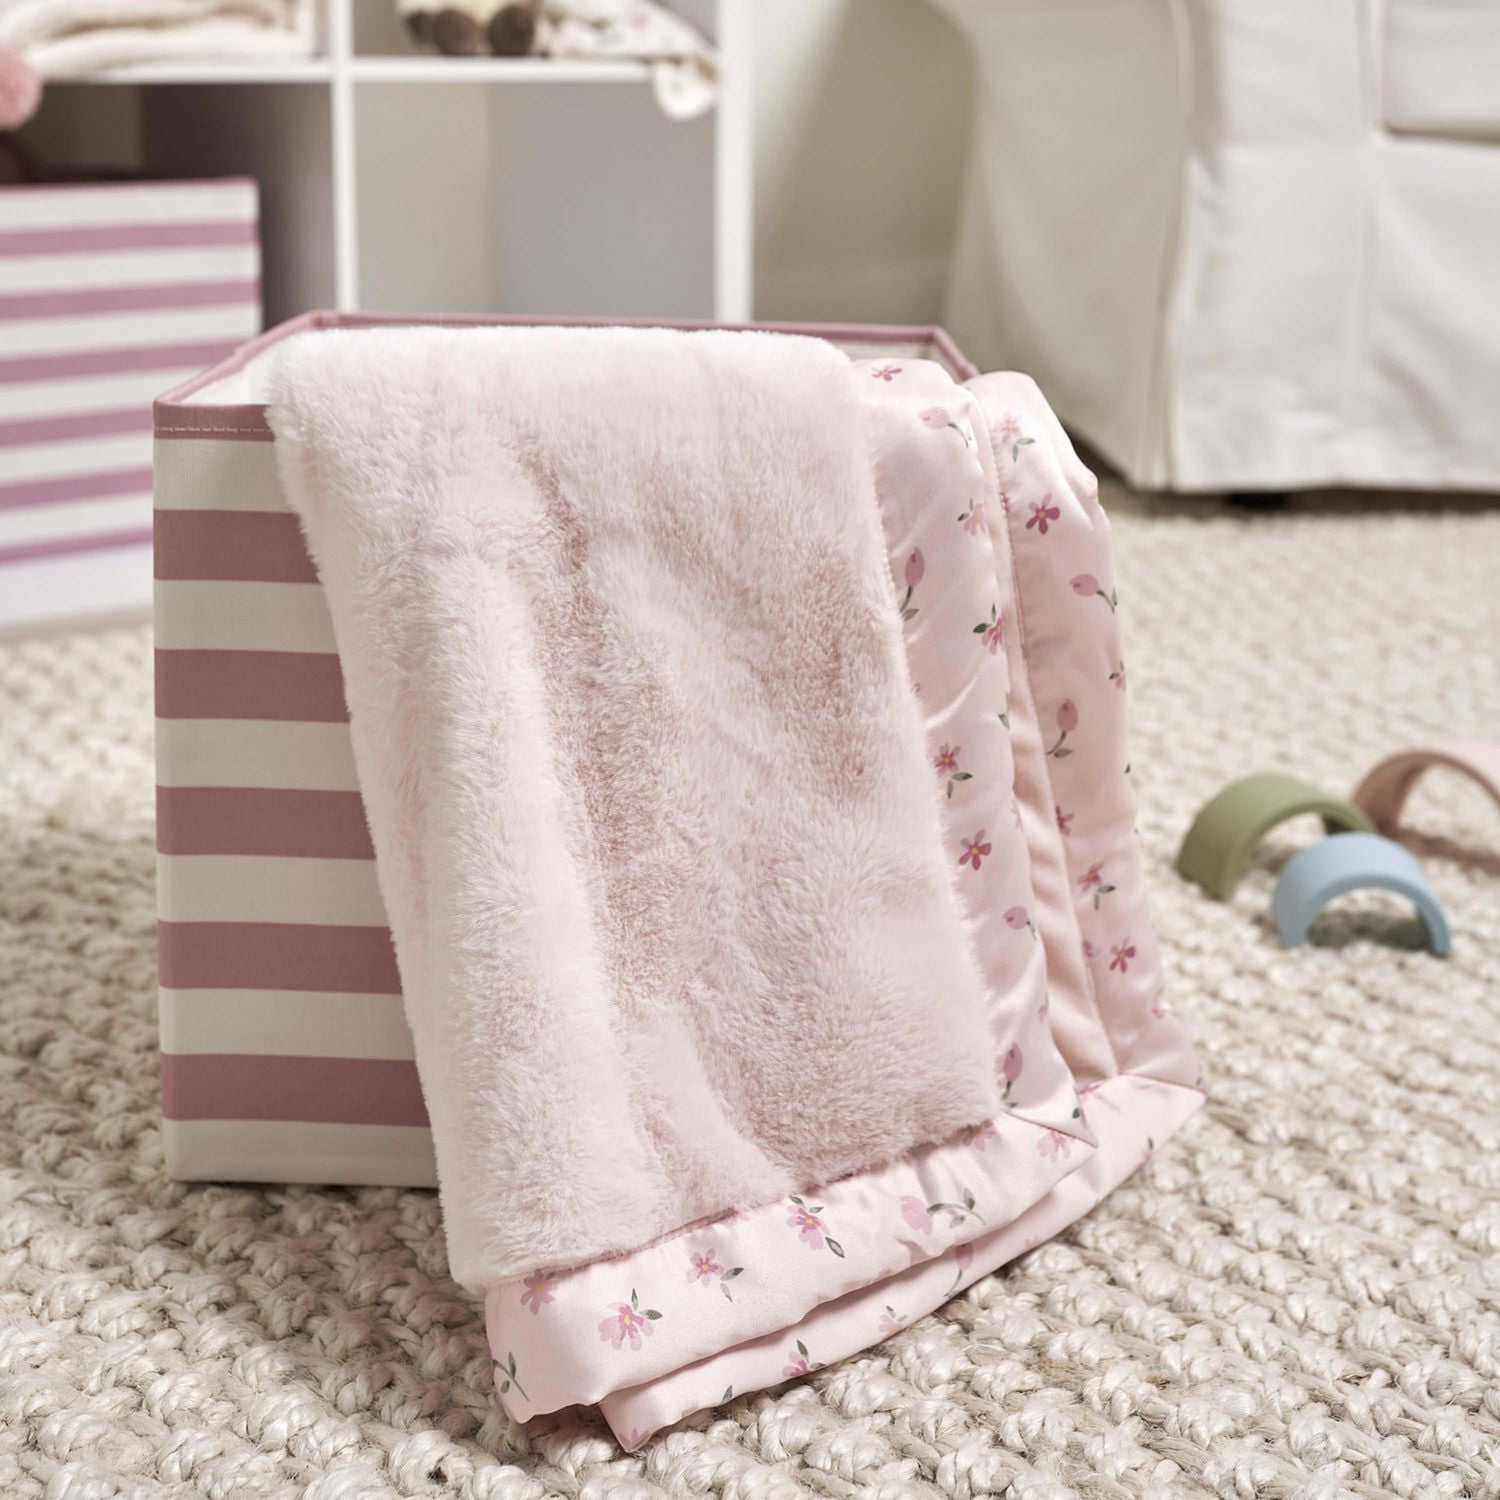 Modern Moments by Gerber Baby Girl 1Pack Plush Blanket with Satin Trim in  Pink, Sized 30 x 40 